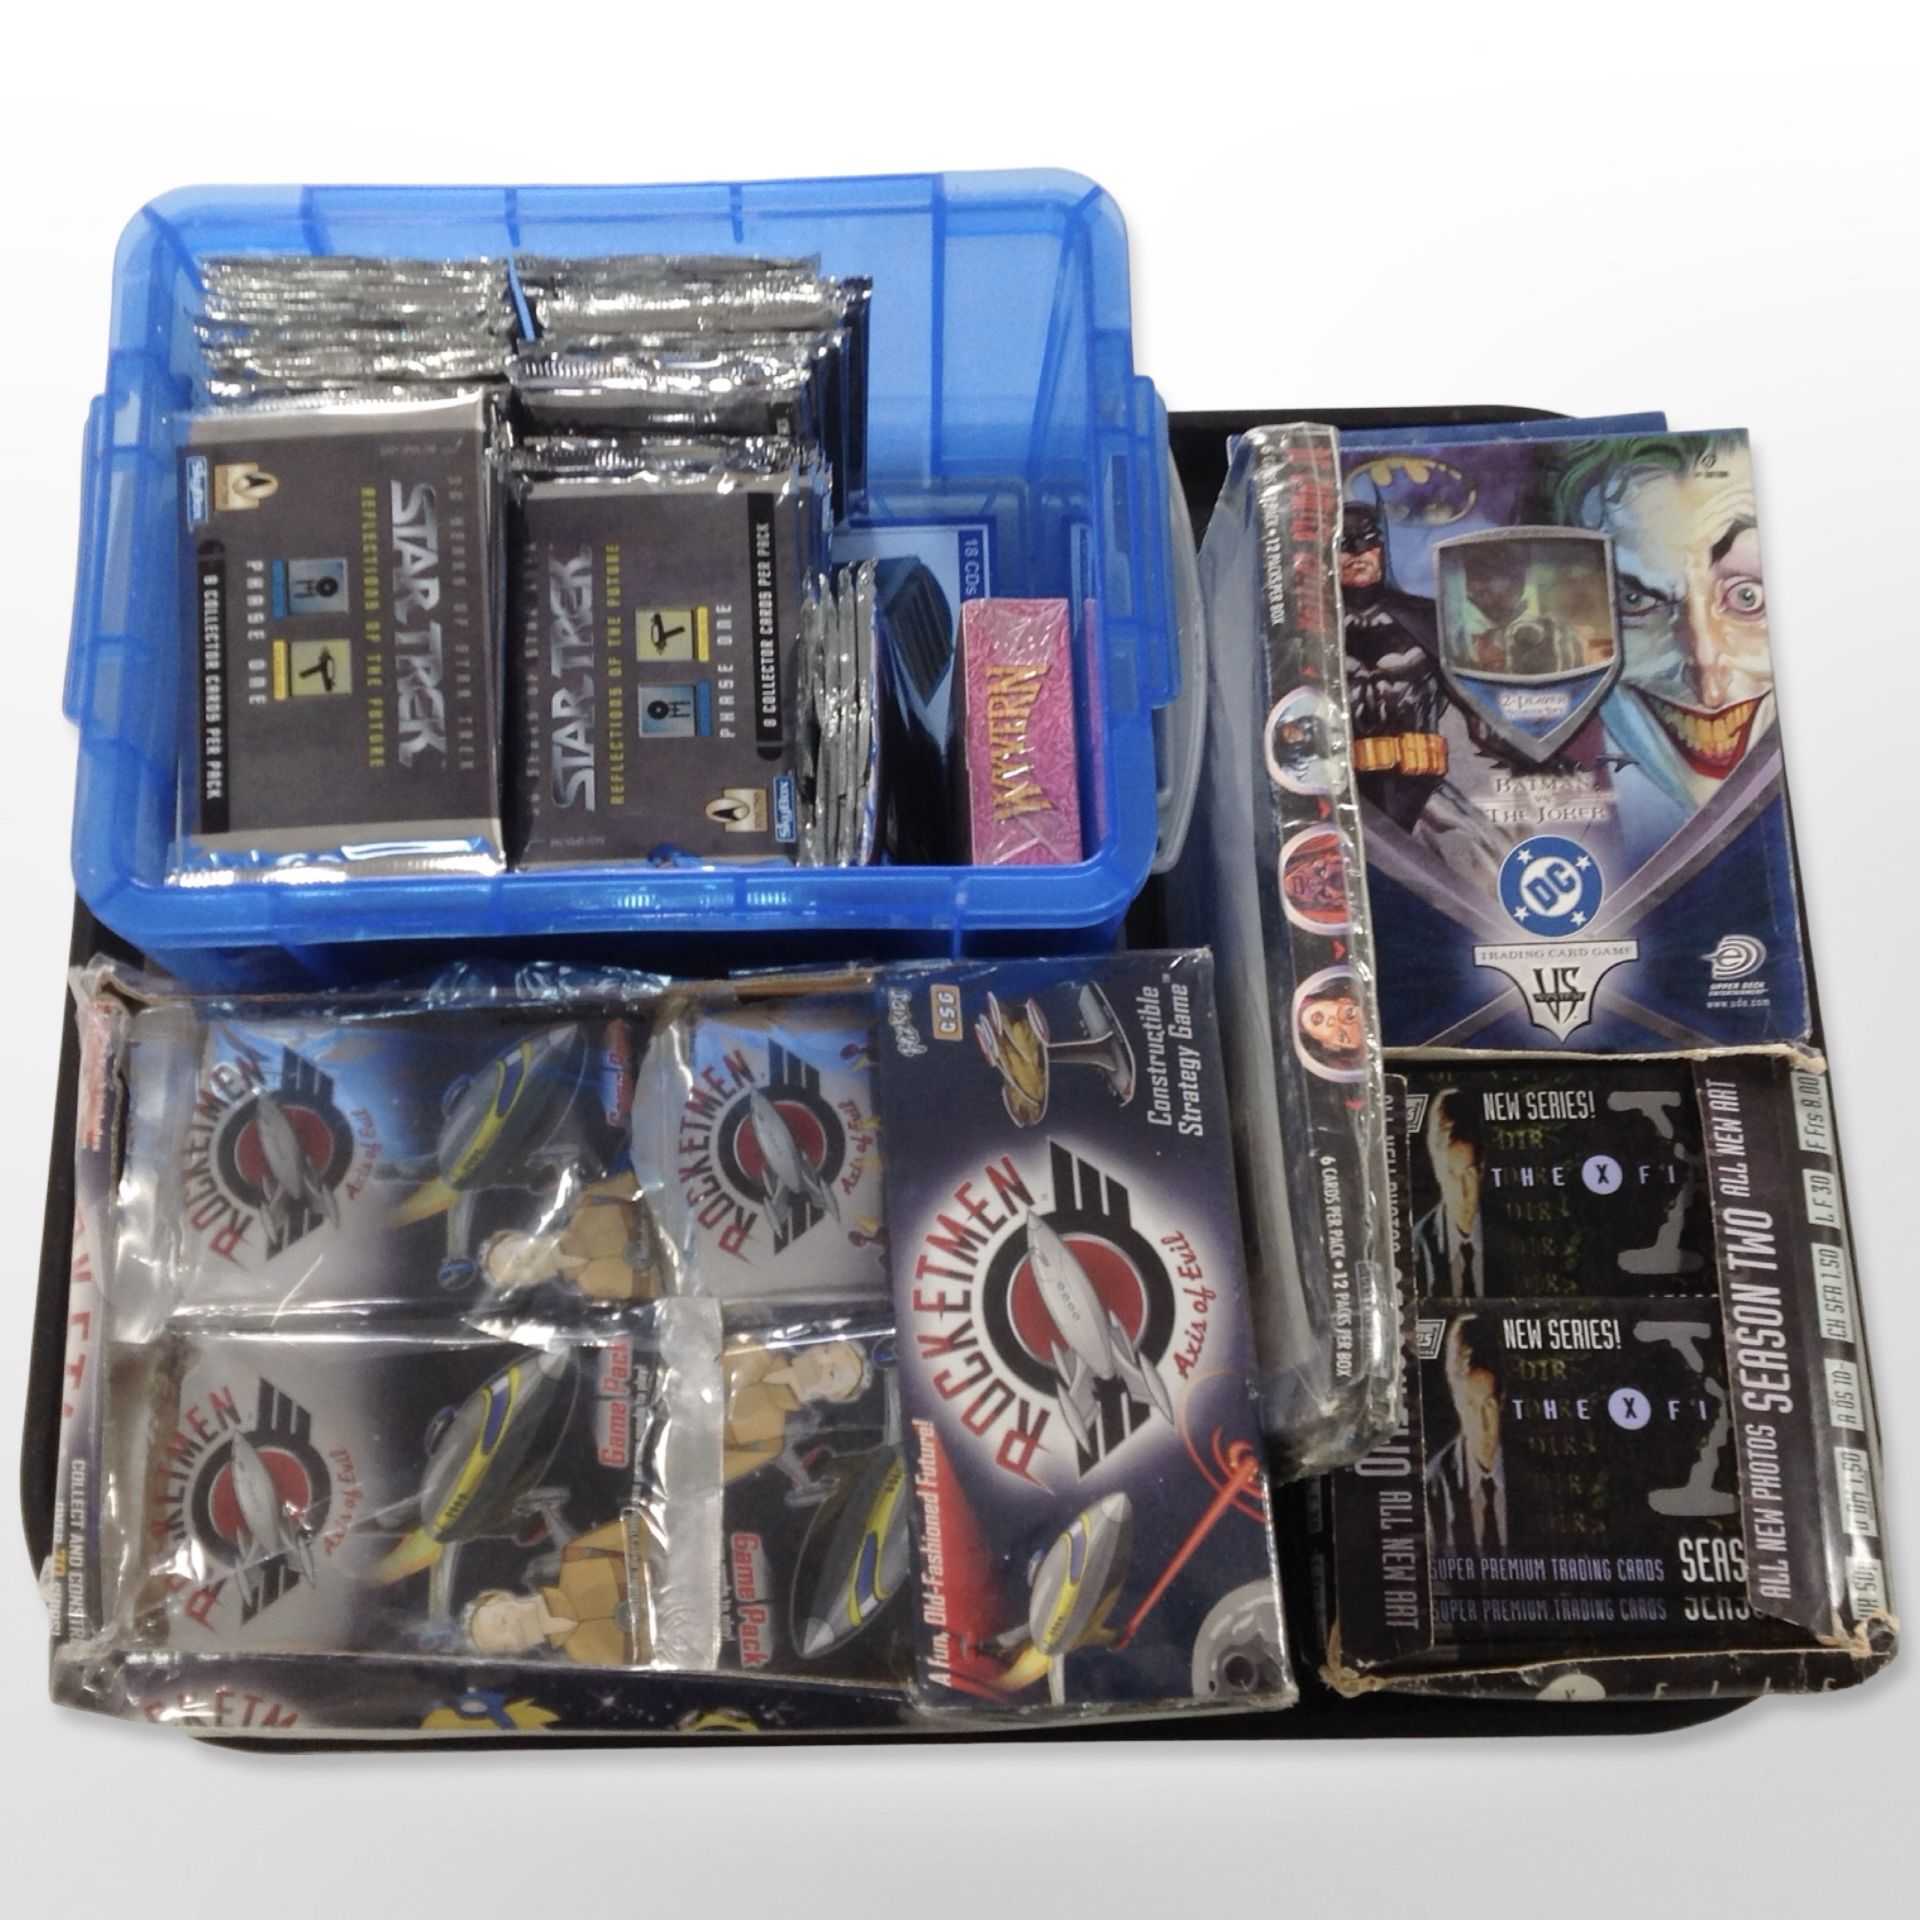 A group of trading cards to include Star Trek, The X-Files, Batman vs The Joker, and Rocketmen.